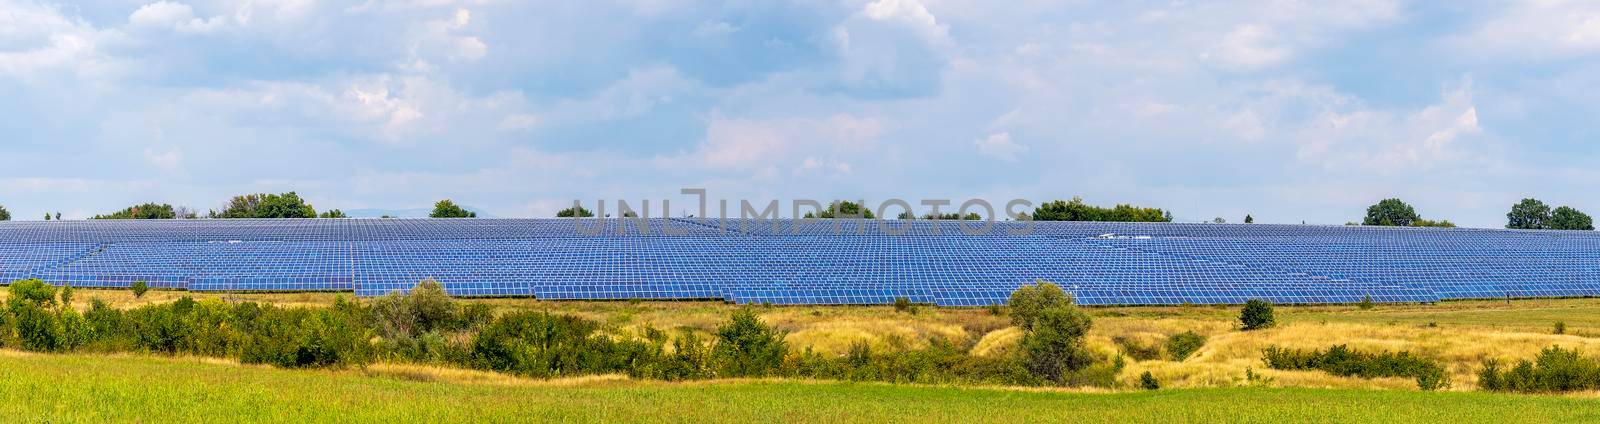 Banner of solar panels at hills against the sky. Industry concept by EdVal